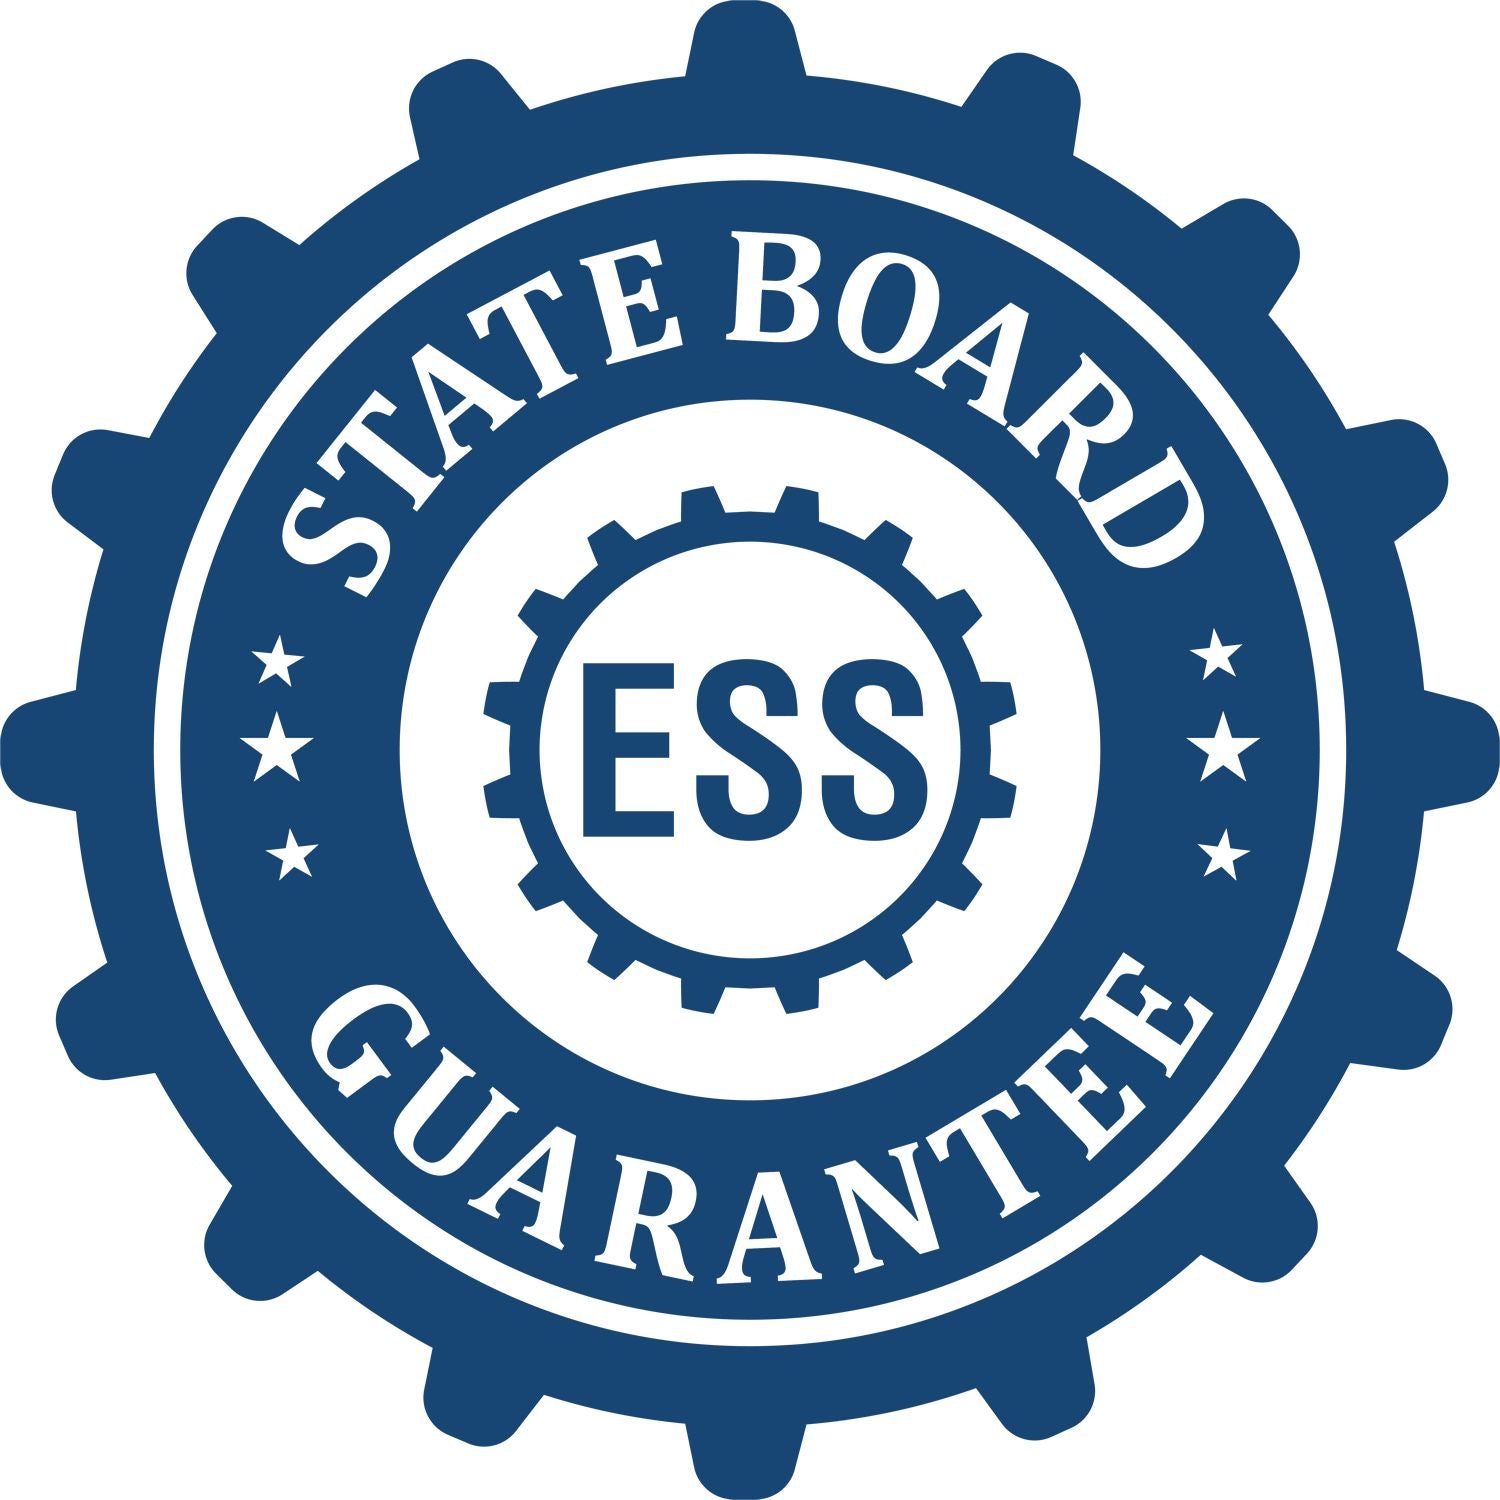 An emblem in a gear shape illustrating a state board guarantee for the Wisconsin Professional Engineer Seal Stamp product.